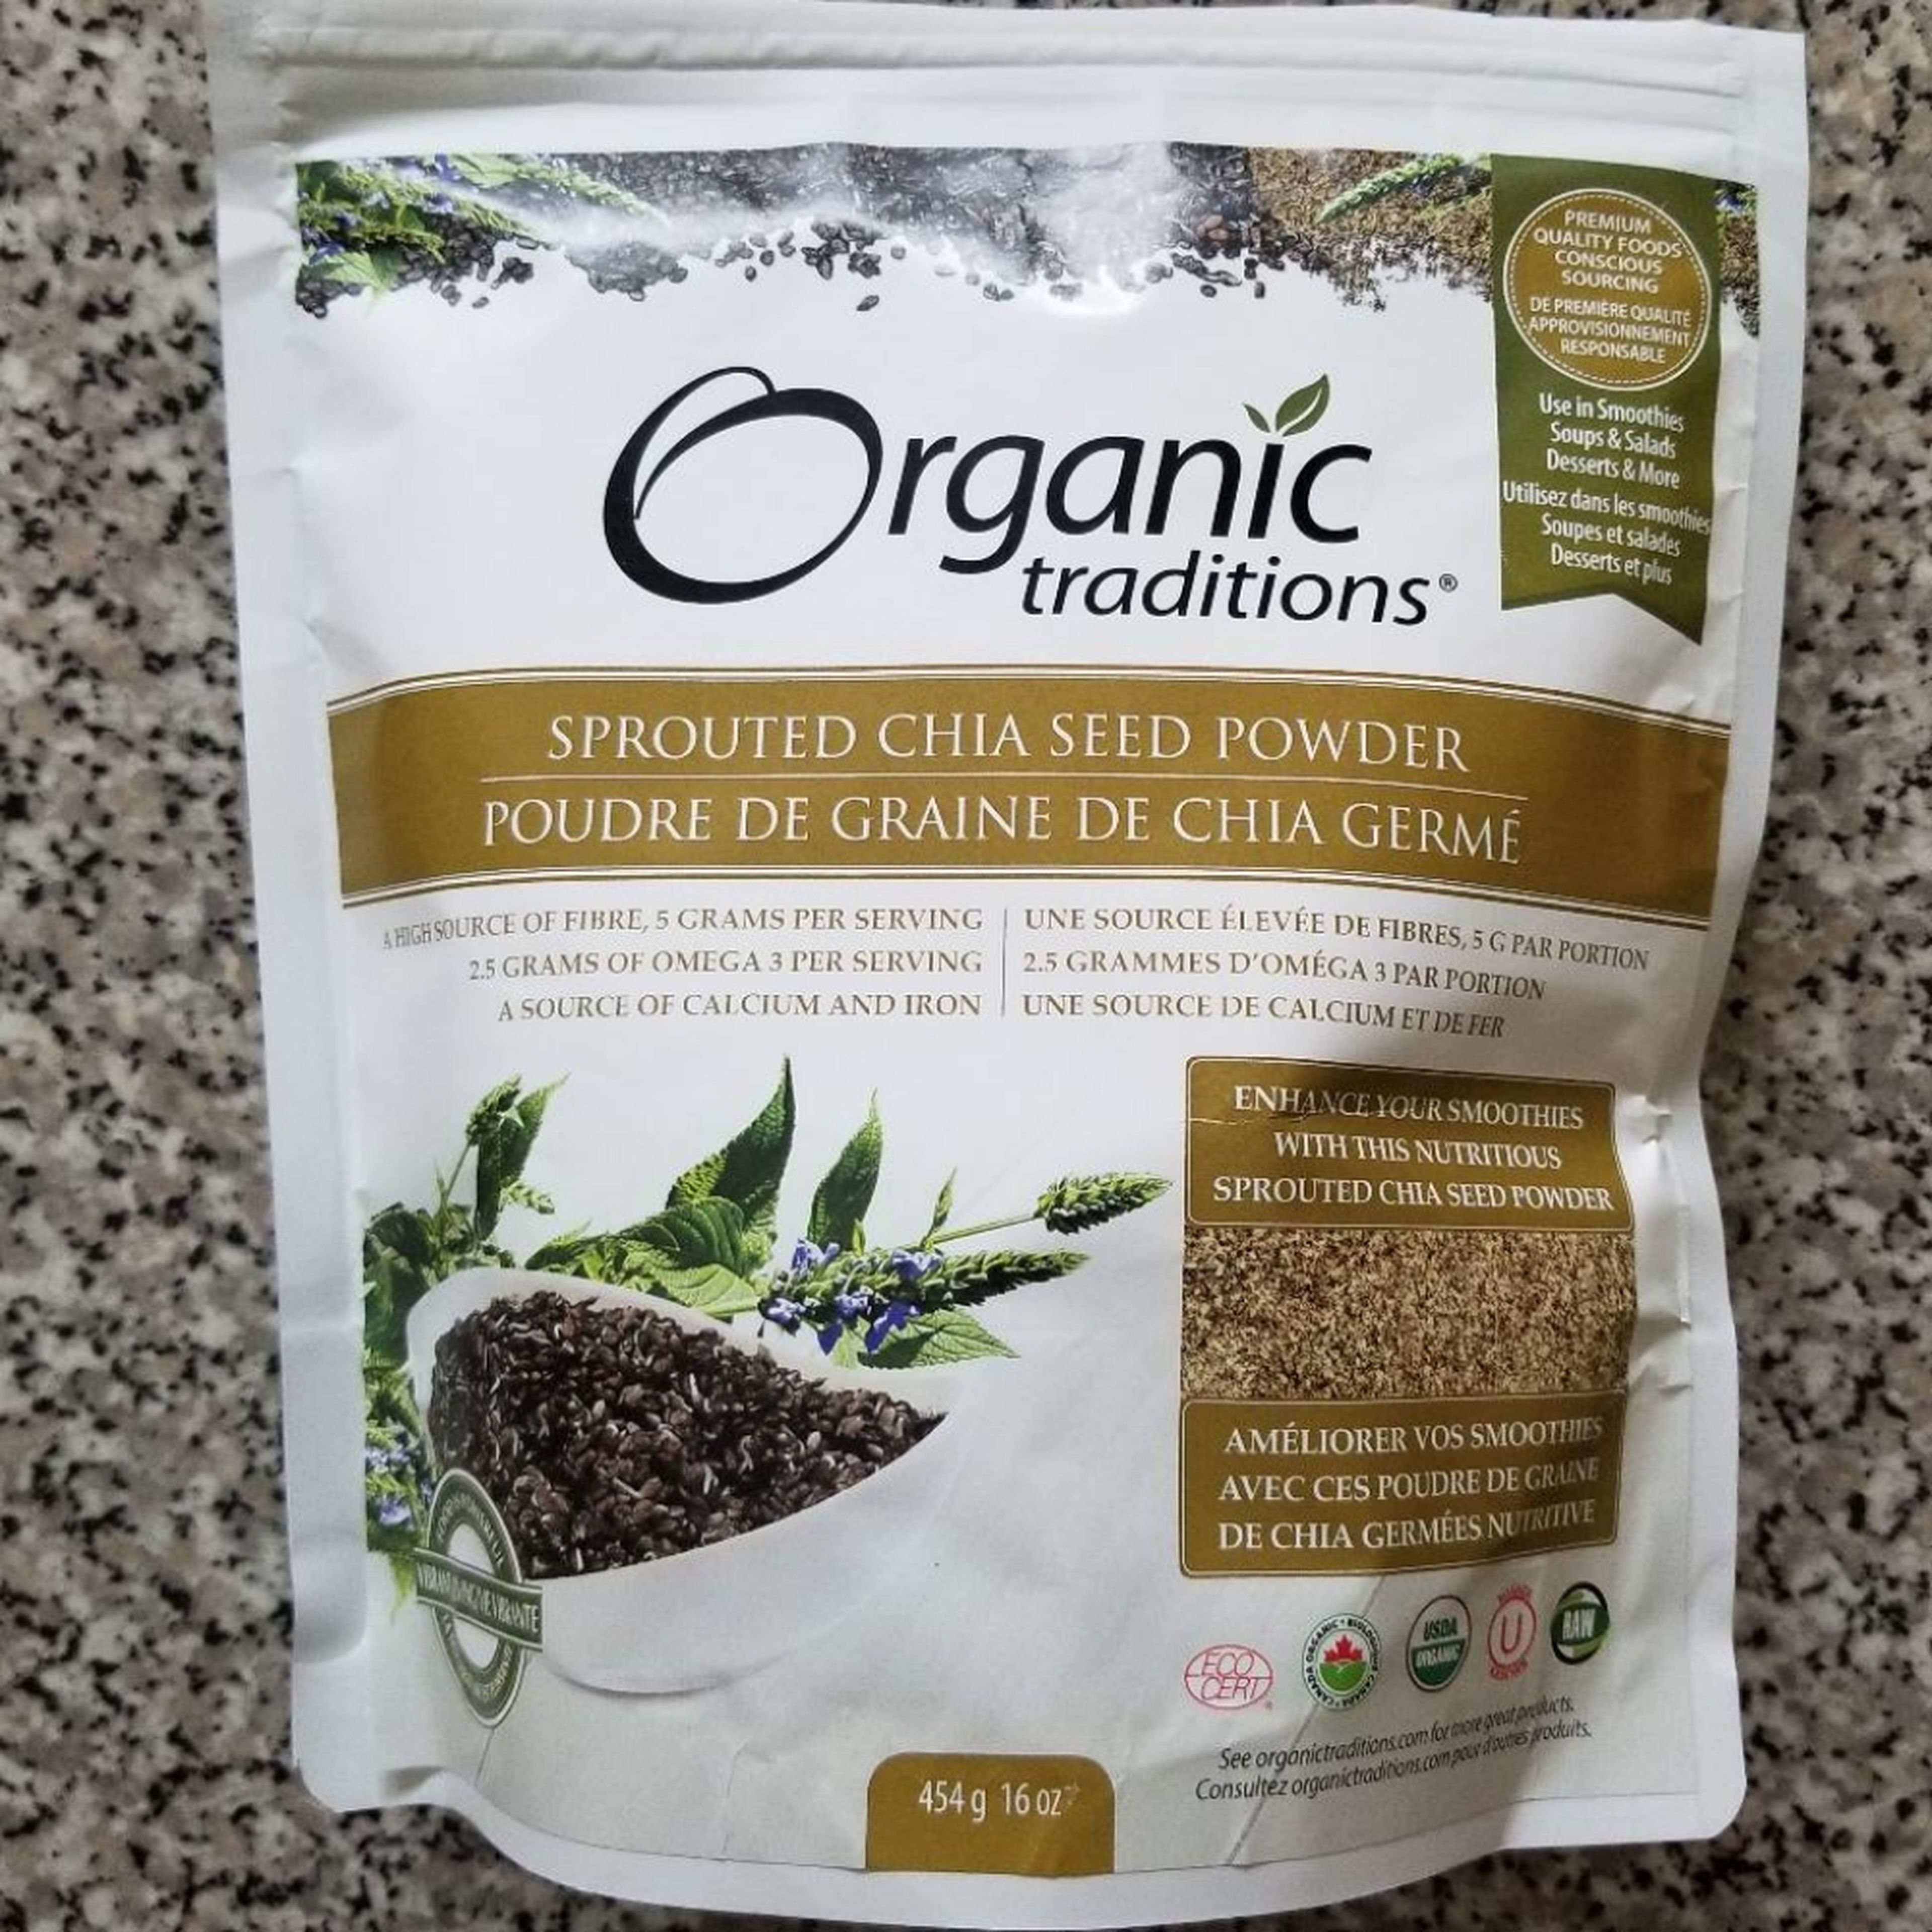 Add 25g sprouted chia seed powder. Available at Whole Foods and most Health Foods stores.